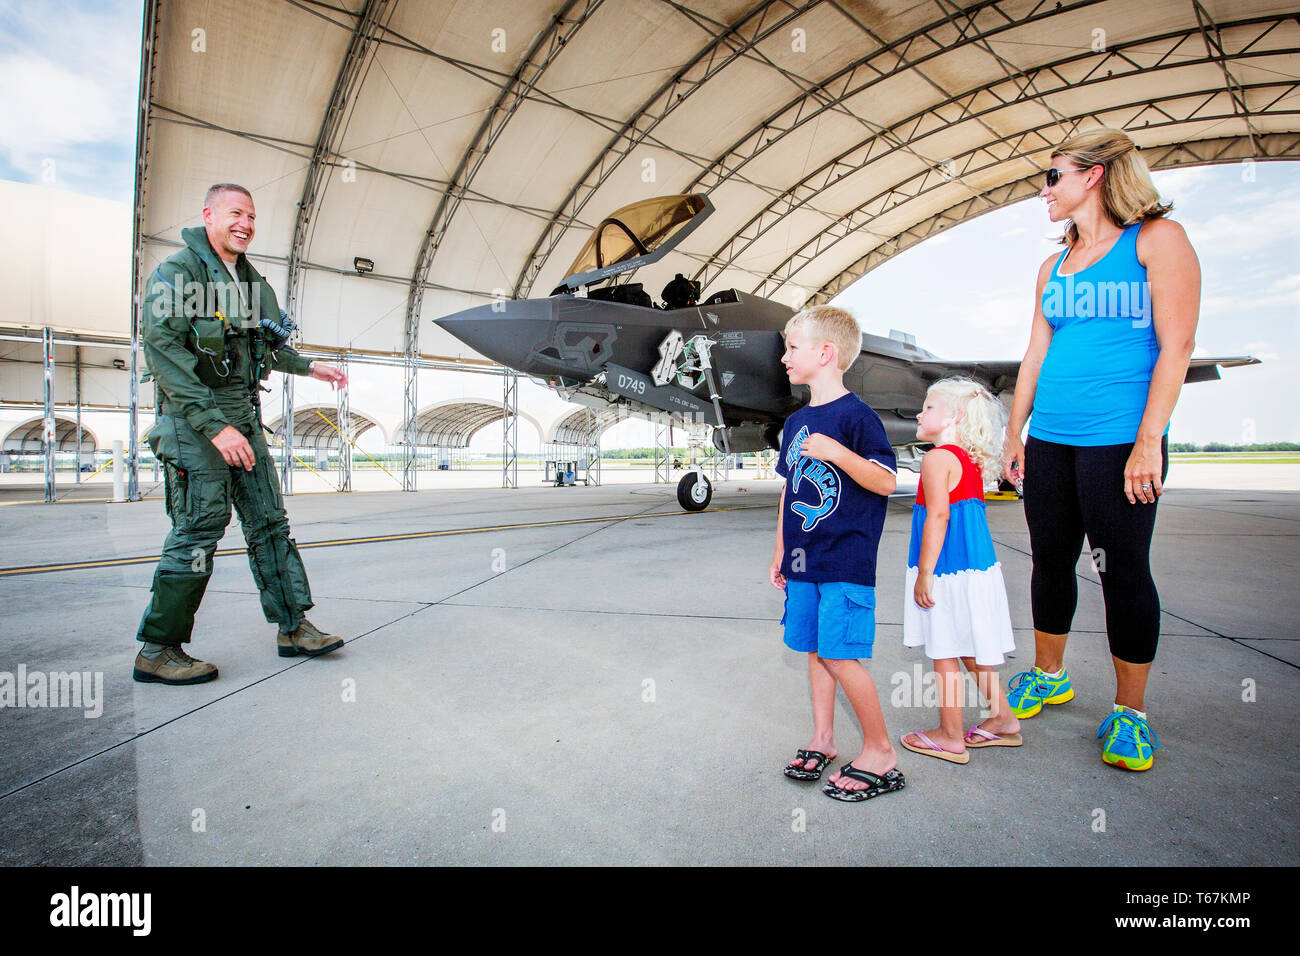 US Pilot Brad Turner is greeted by his wife Whitney , daughter Addison (4) and their son Chase (10) after a successful first mission in the new F-35 Fighter Jet at the Eglin Air Force Base. Stock Photo